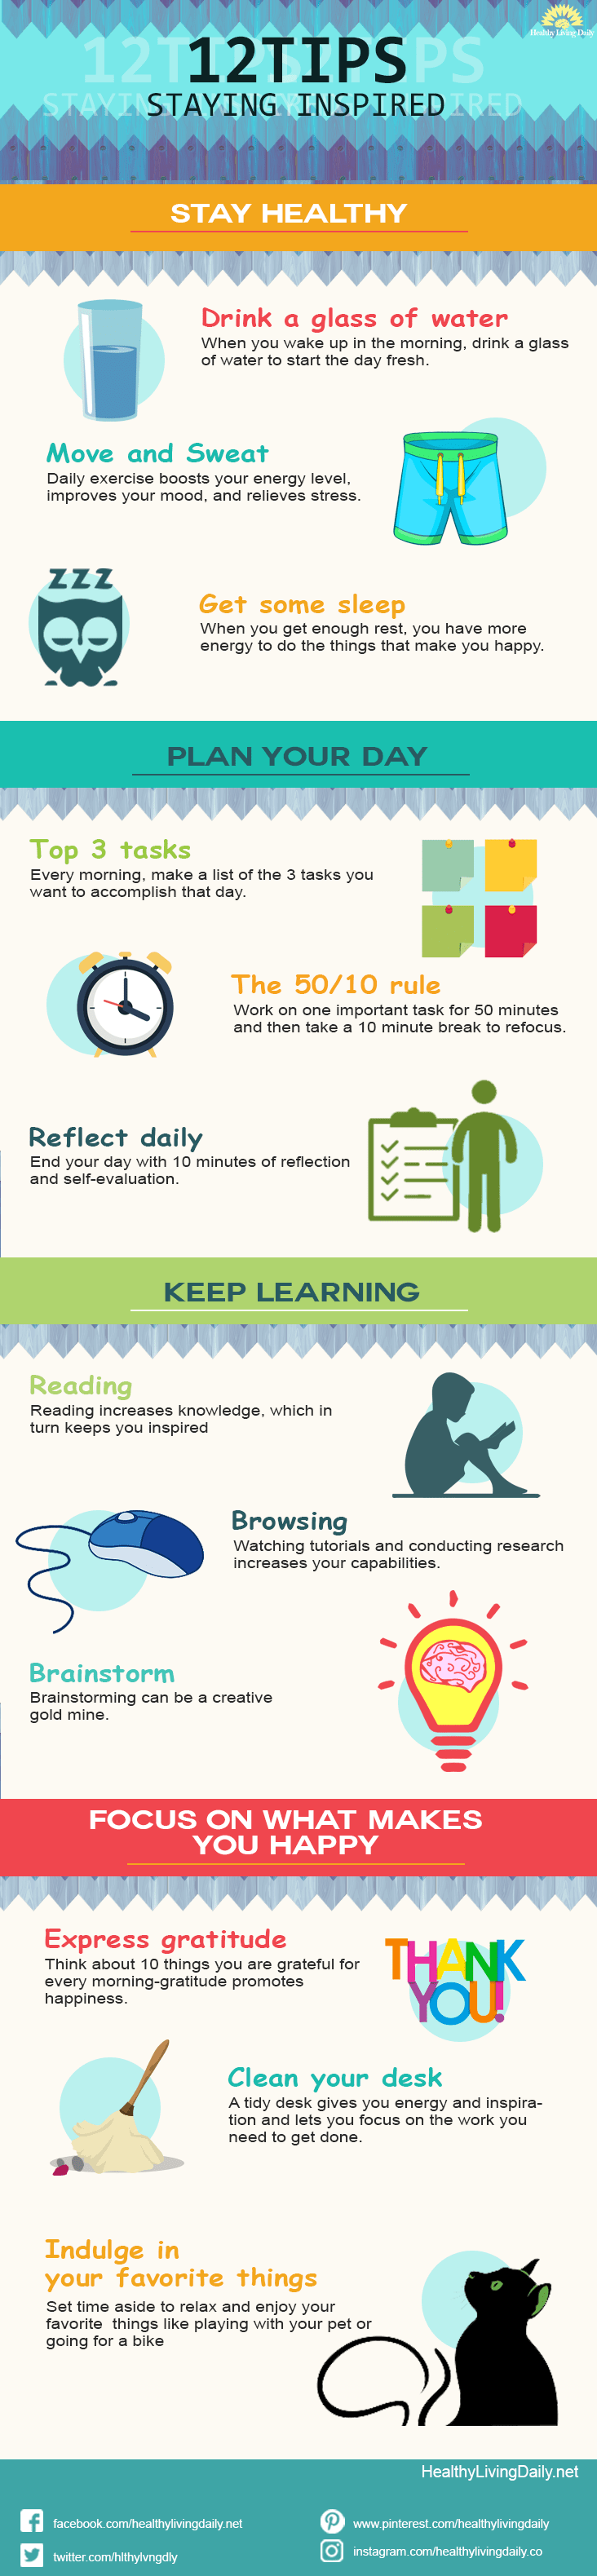 infographic image about staying inspired